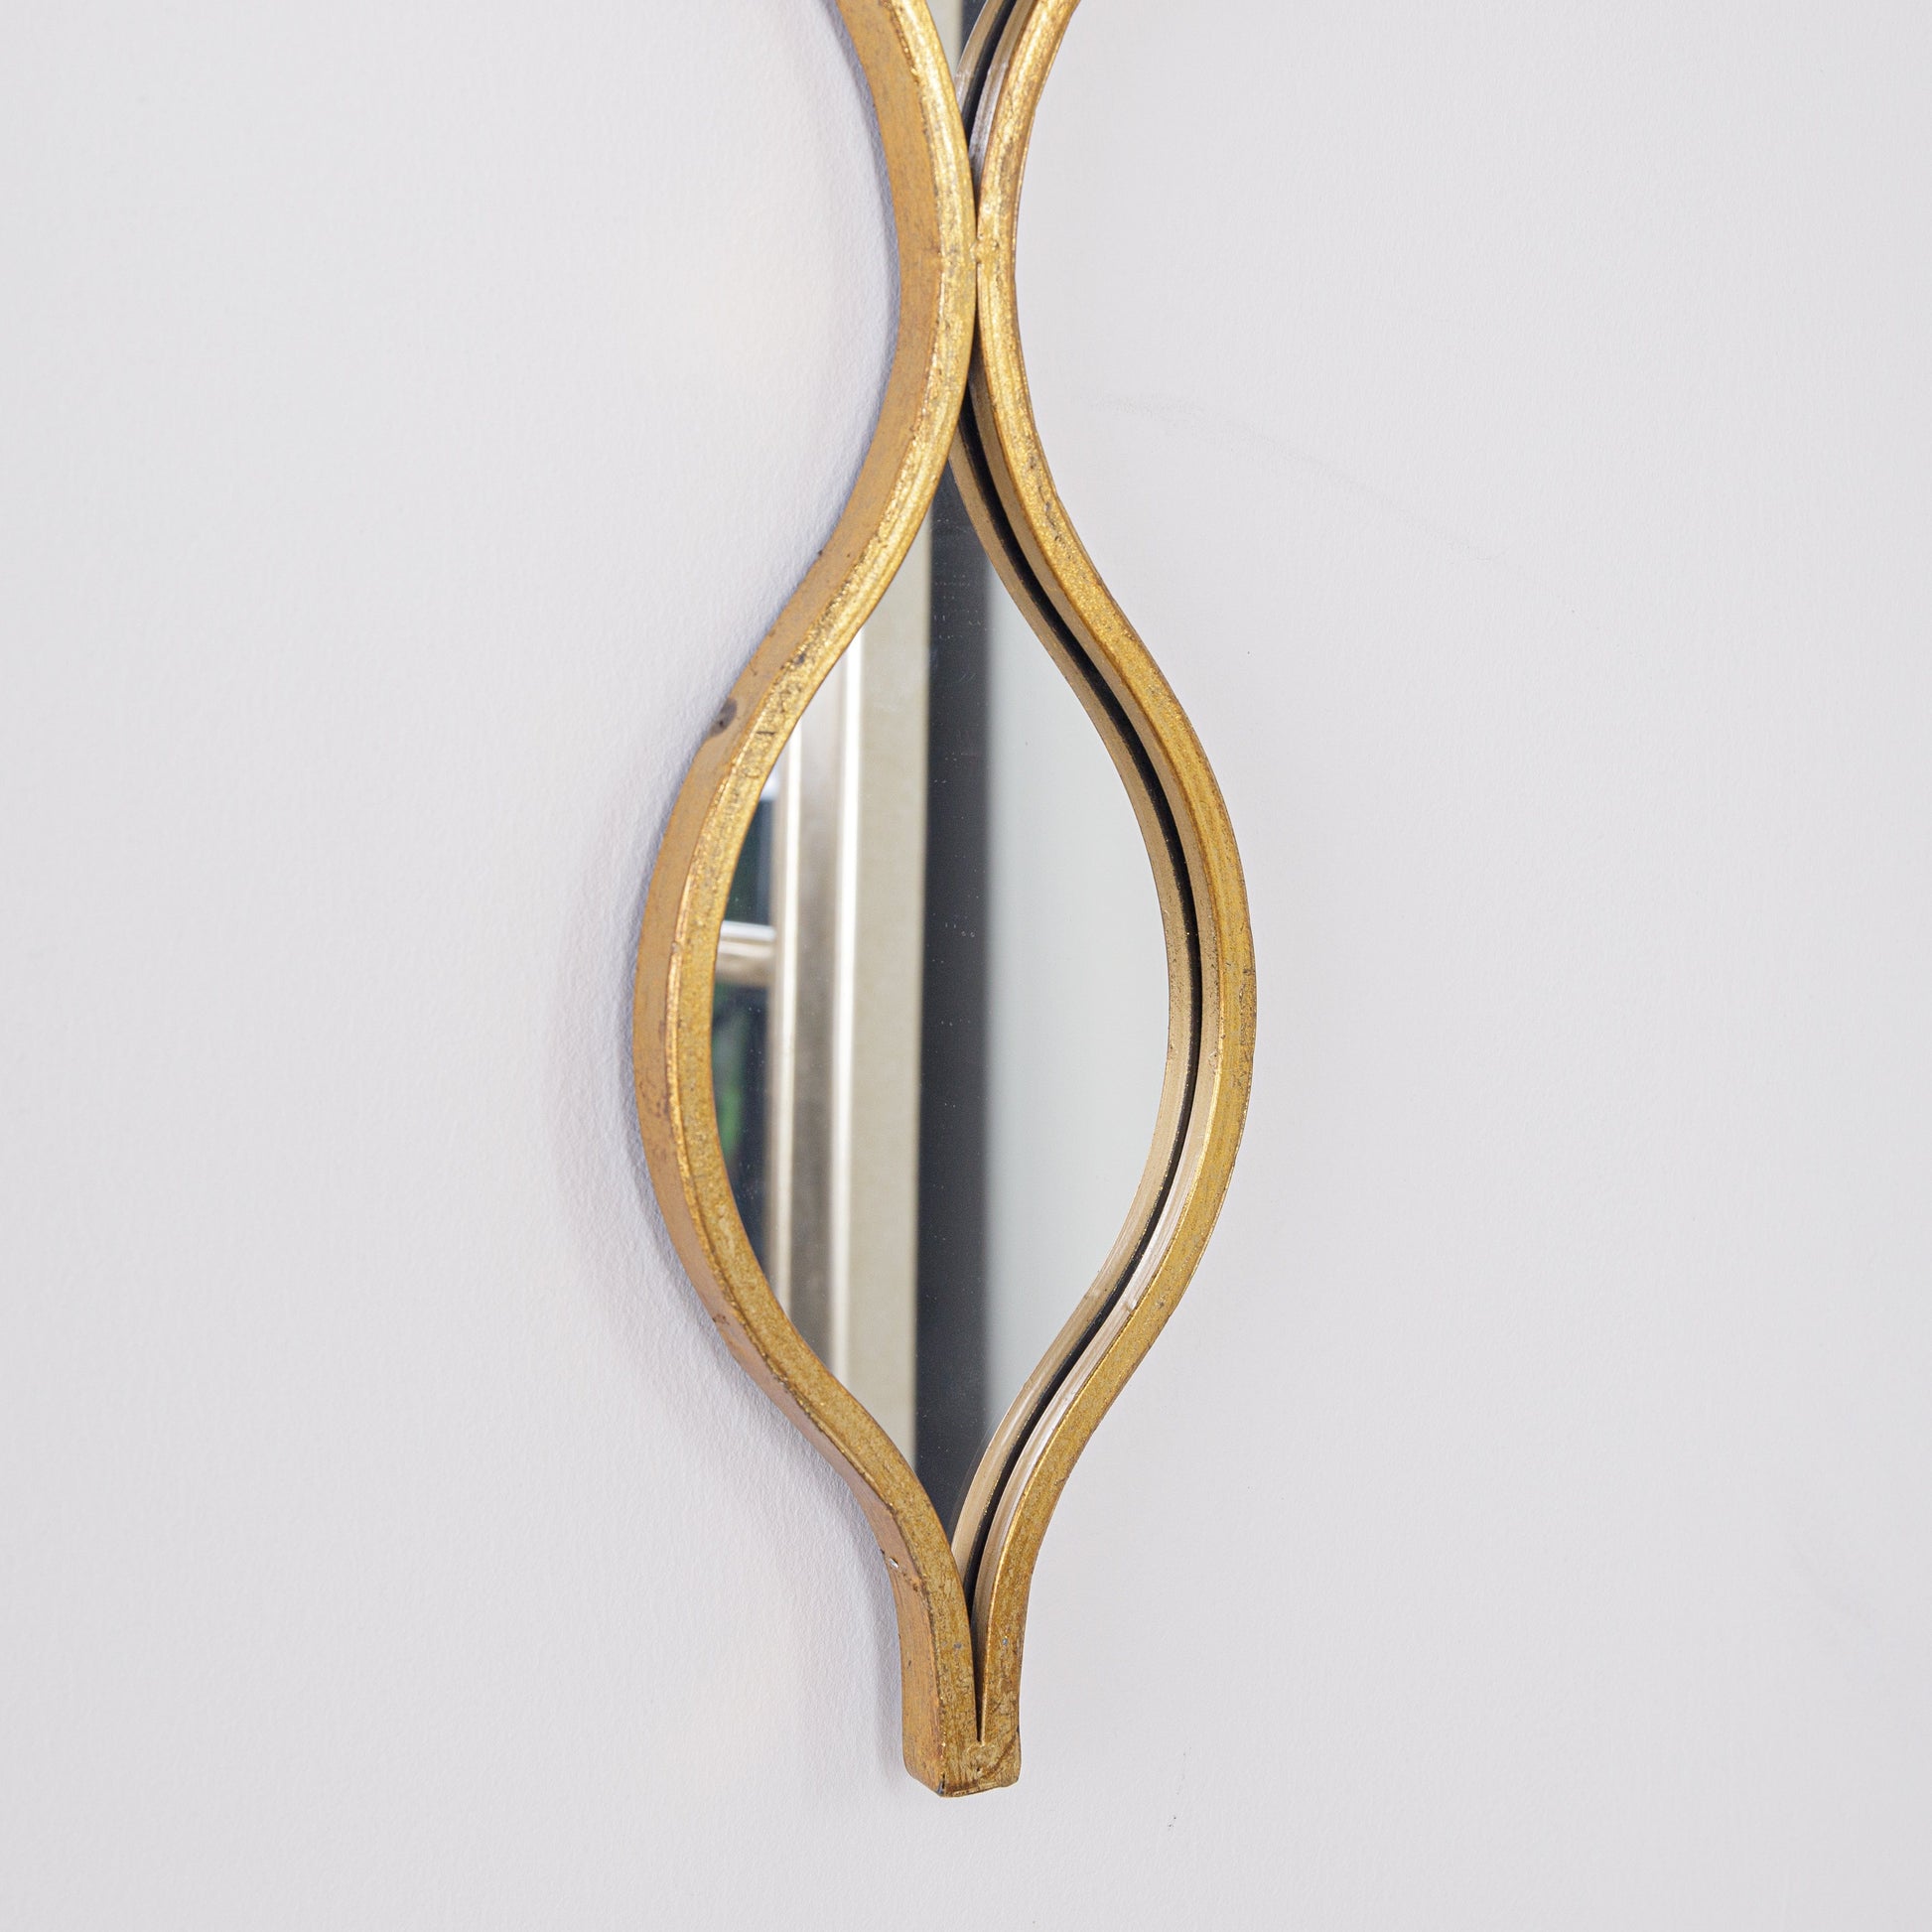 Mirrors  -  Hill Decorative Hanging Mirror Gold 18070  -  60003025